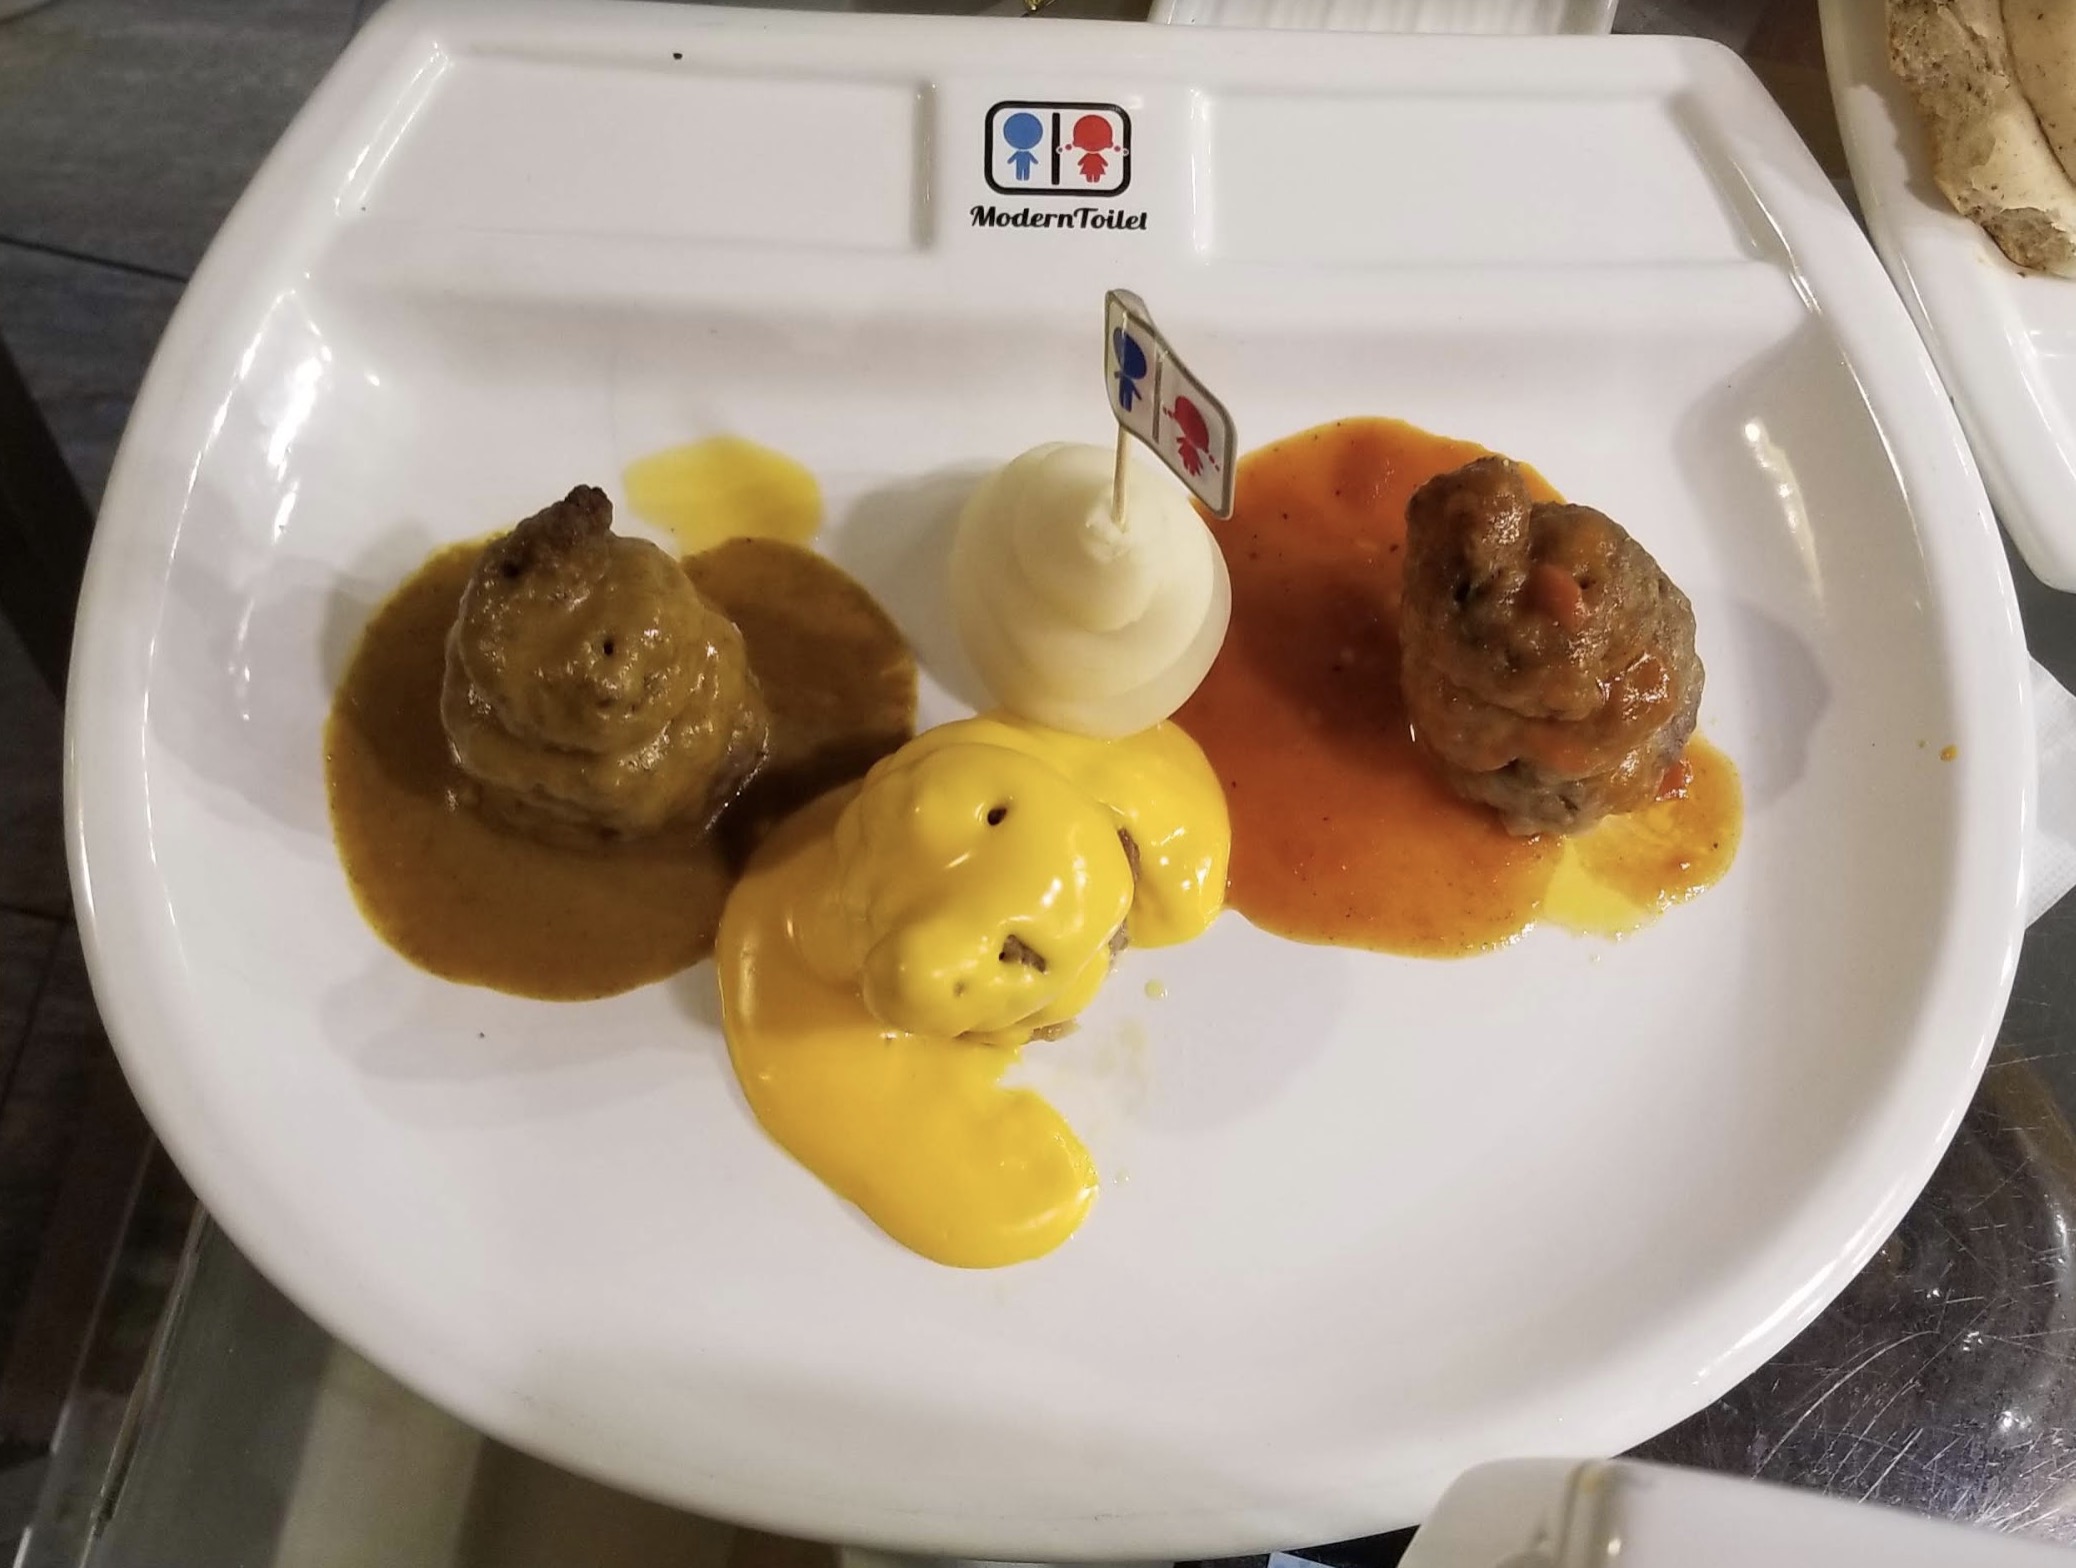 taipei-modern-toilet-restaurant-review-food-2 - Points with a Crew